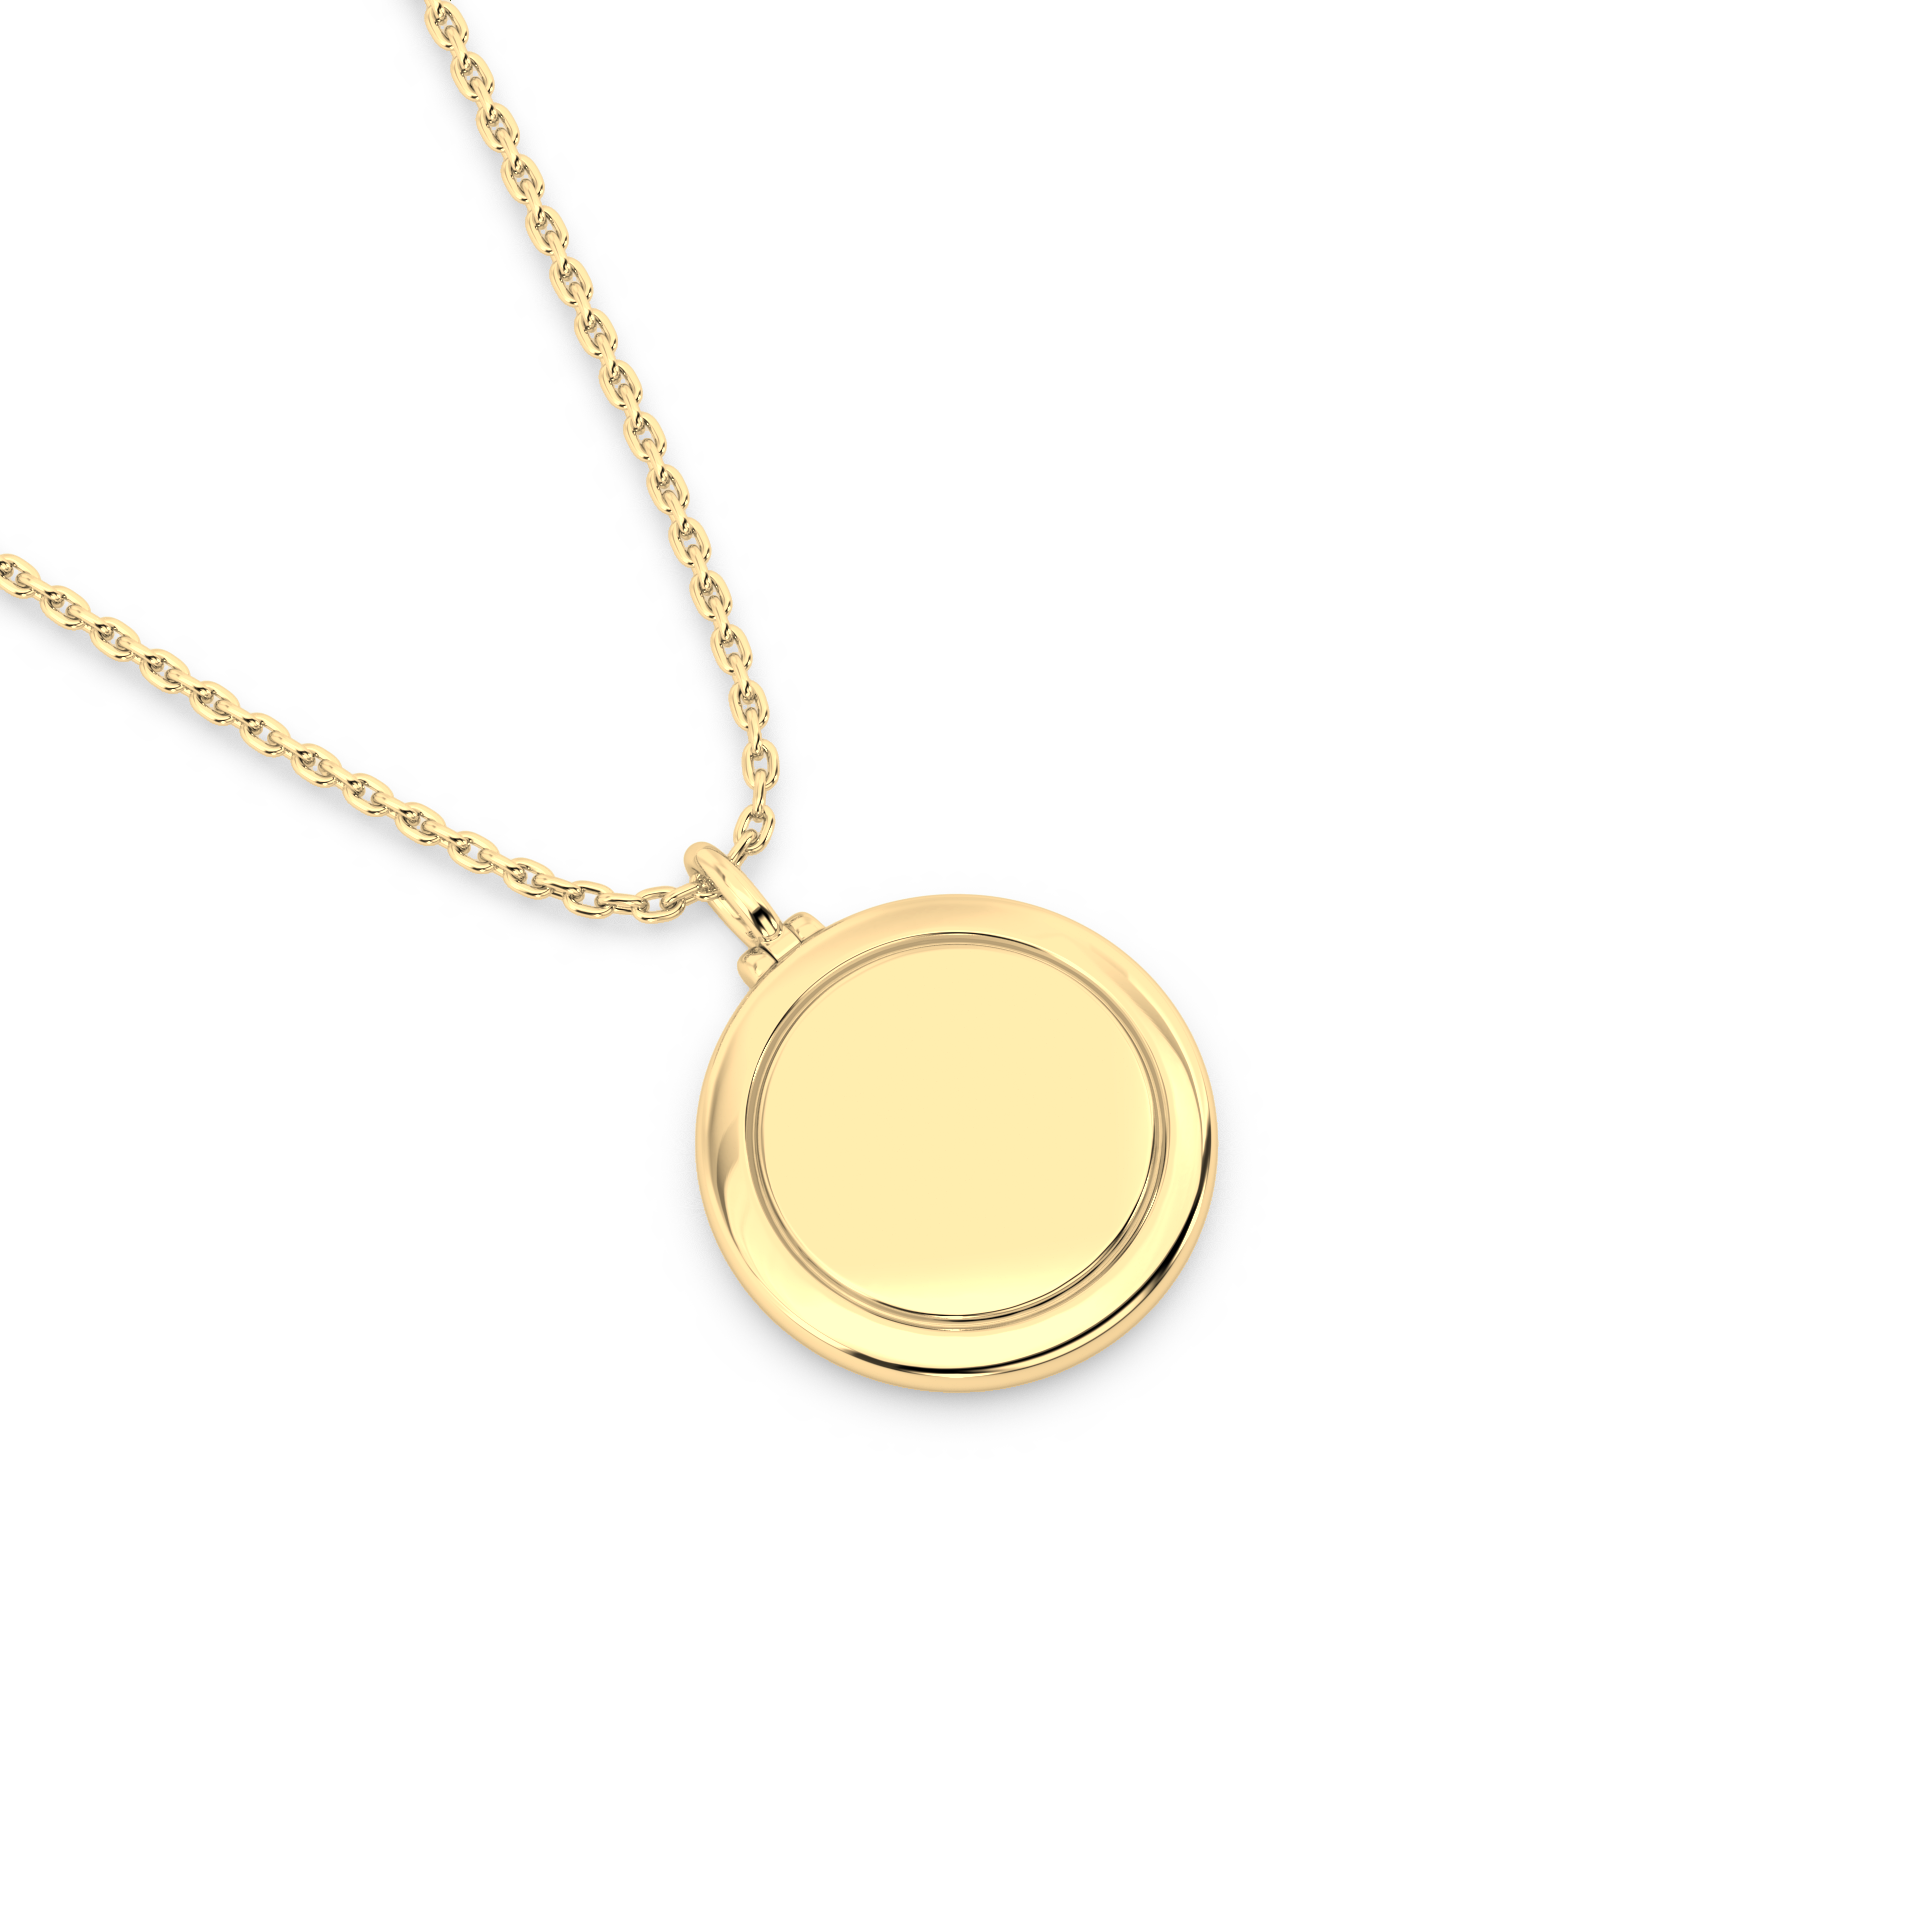 CYG-PV Engravable Disc Pendant in USA